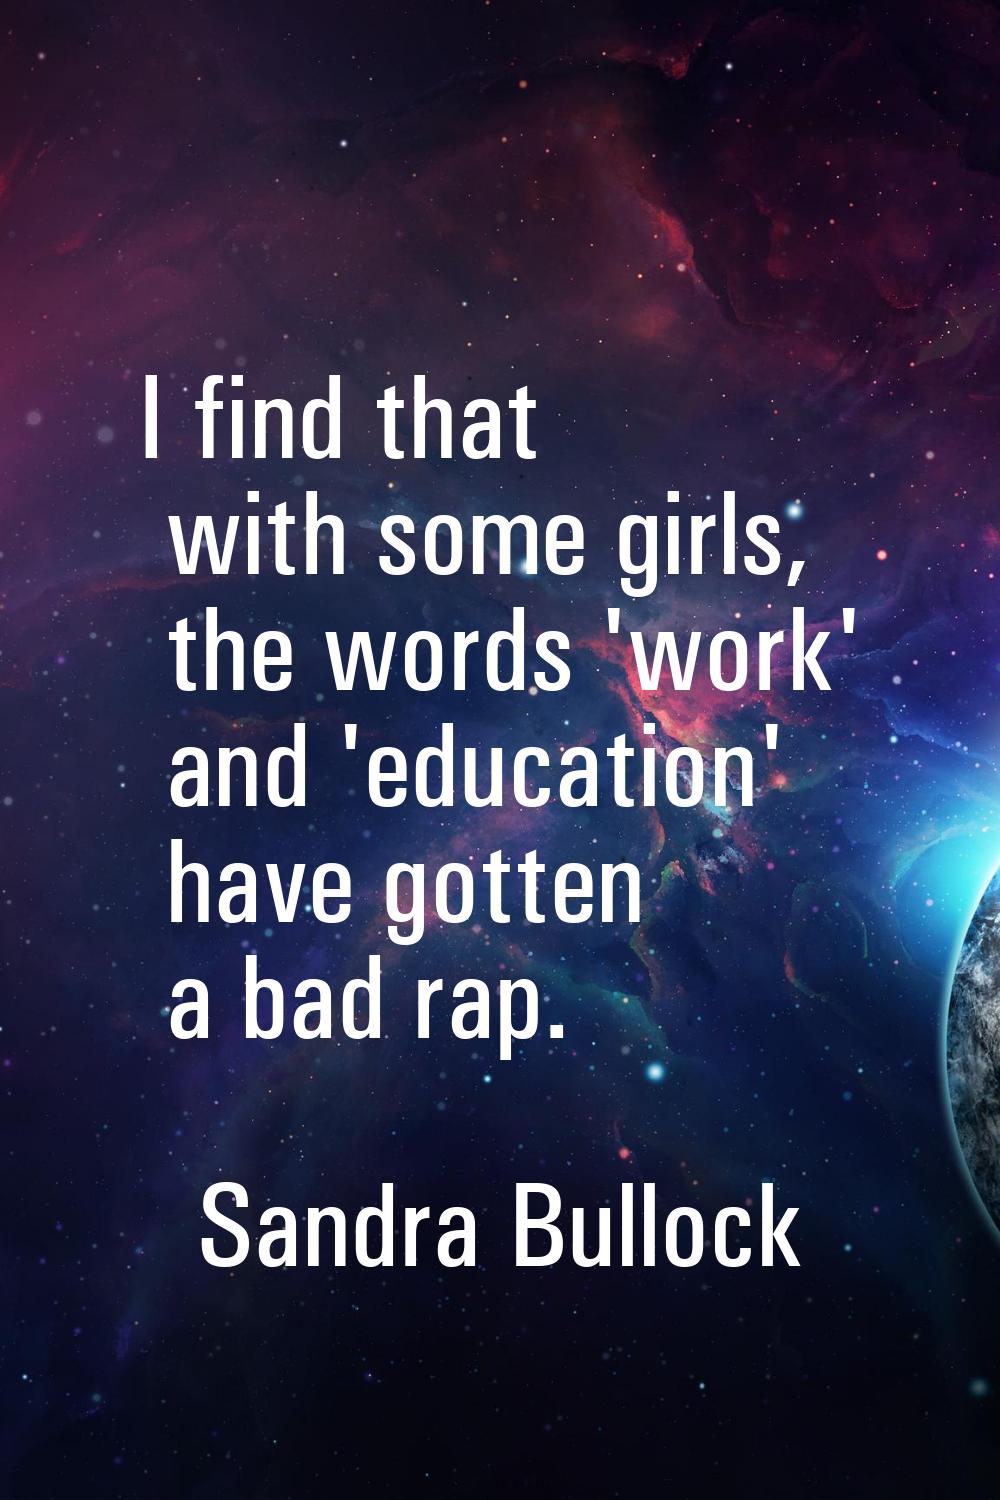 I find that with some girls, the words 'work' and 'education' have gotten a bad rap.